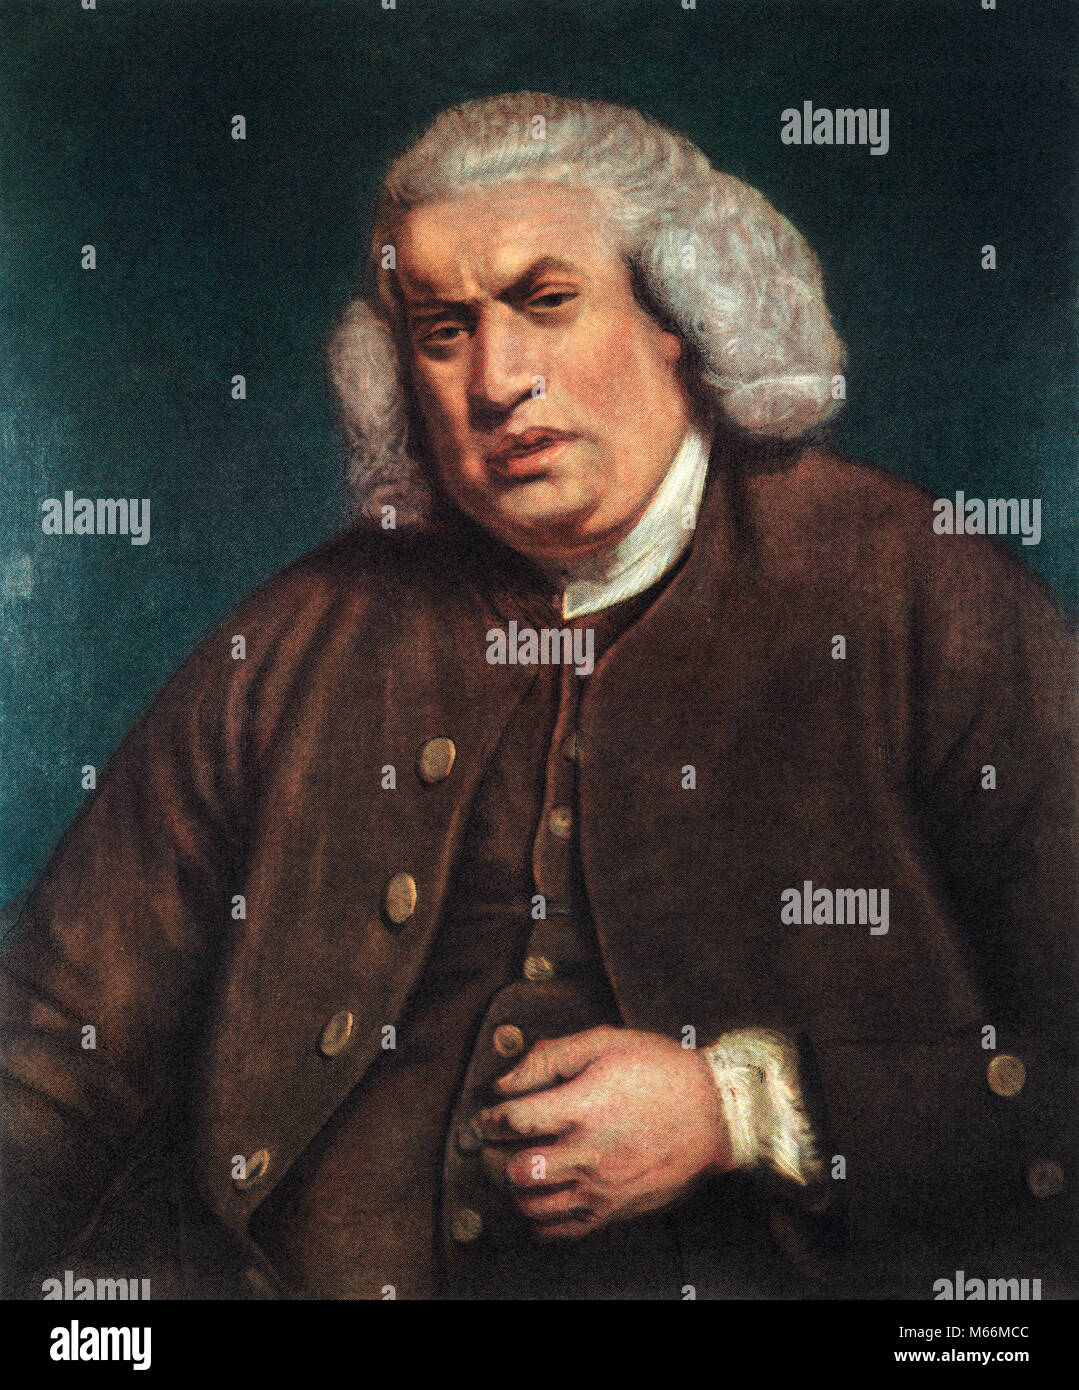 1700s 1772 PORTRAIT SAMUEL JOHNSON BY REYNOLDS DR. JOHNSON PUBLISHED IN 1755 A DICTIONARY OF ENGLISH LANGUAGE COLOR HALFTONE - kh13272 CPC001 HARS ESSAYIST INTELLECTUAL JOSHUA REYNOLDS LEXICOGRAPHER LOOKING AT CAMERA MORALIST OLD FASHIONED PERSONS POET PUBLISHED REYNOLDS SAMUEL SAMUEL JOHNSON SCHOLAR Stock Photo